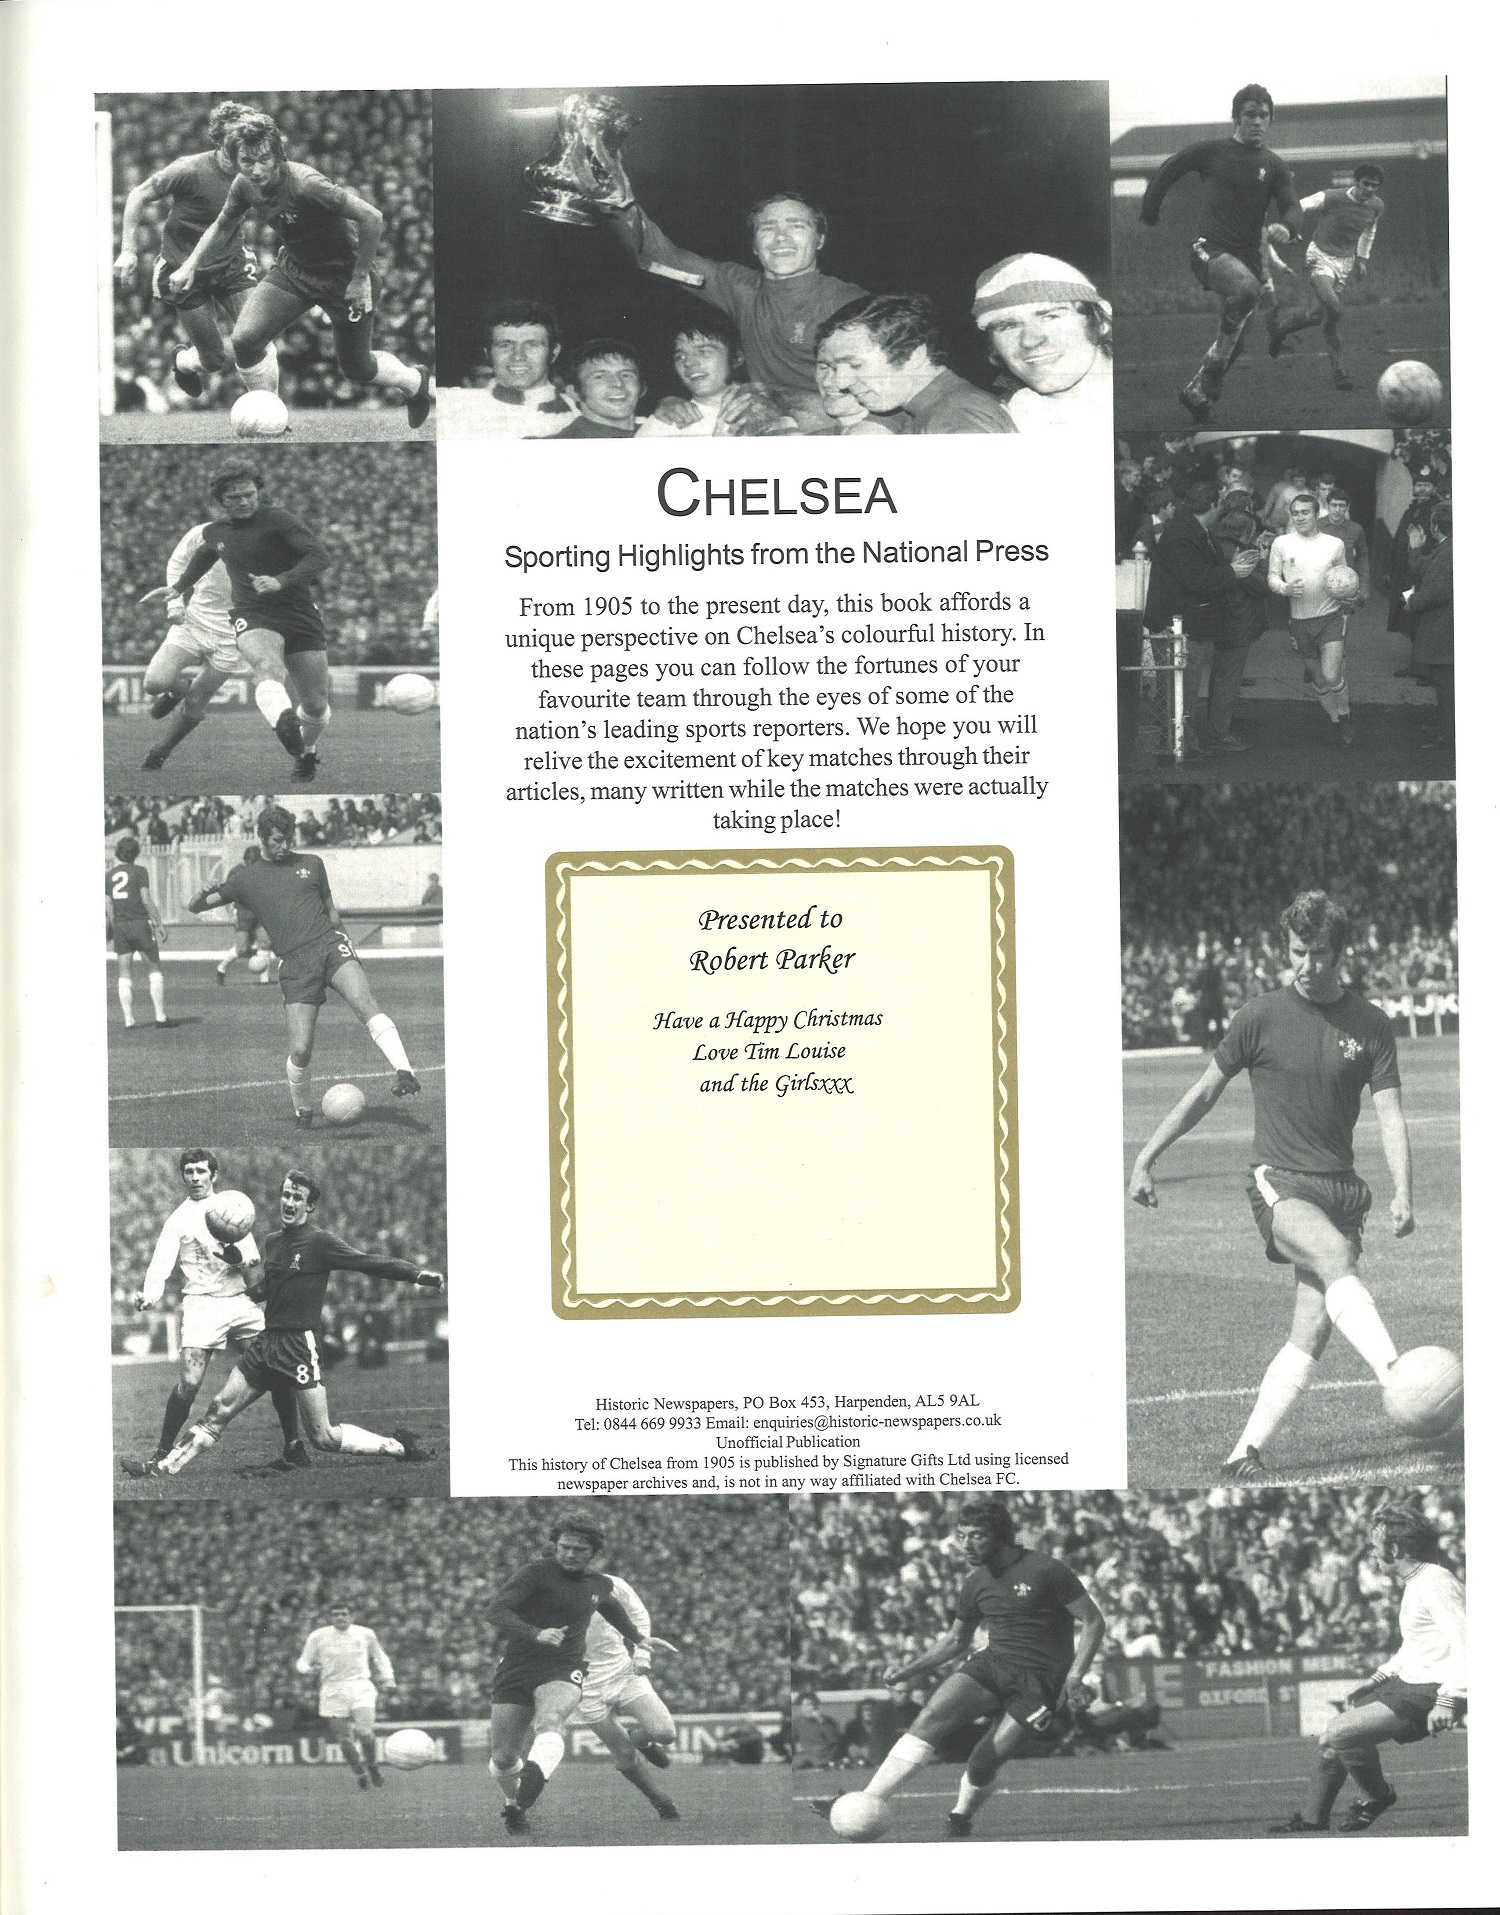 Football hardback book Chelsea A History from 1905 a superb book charting the Londons club - Image 2 of 2